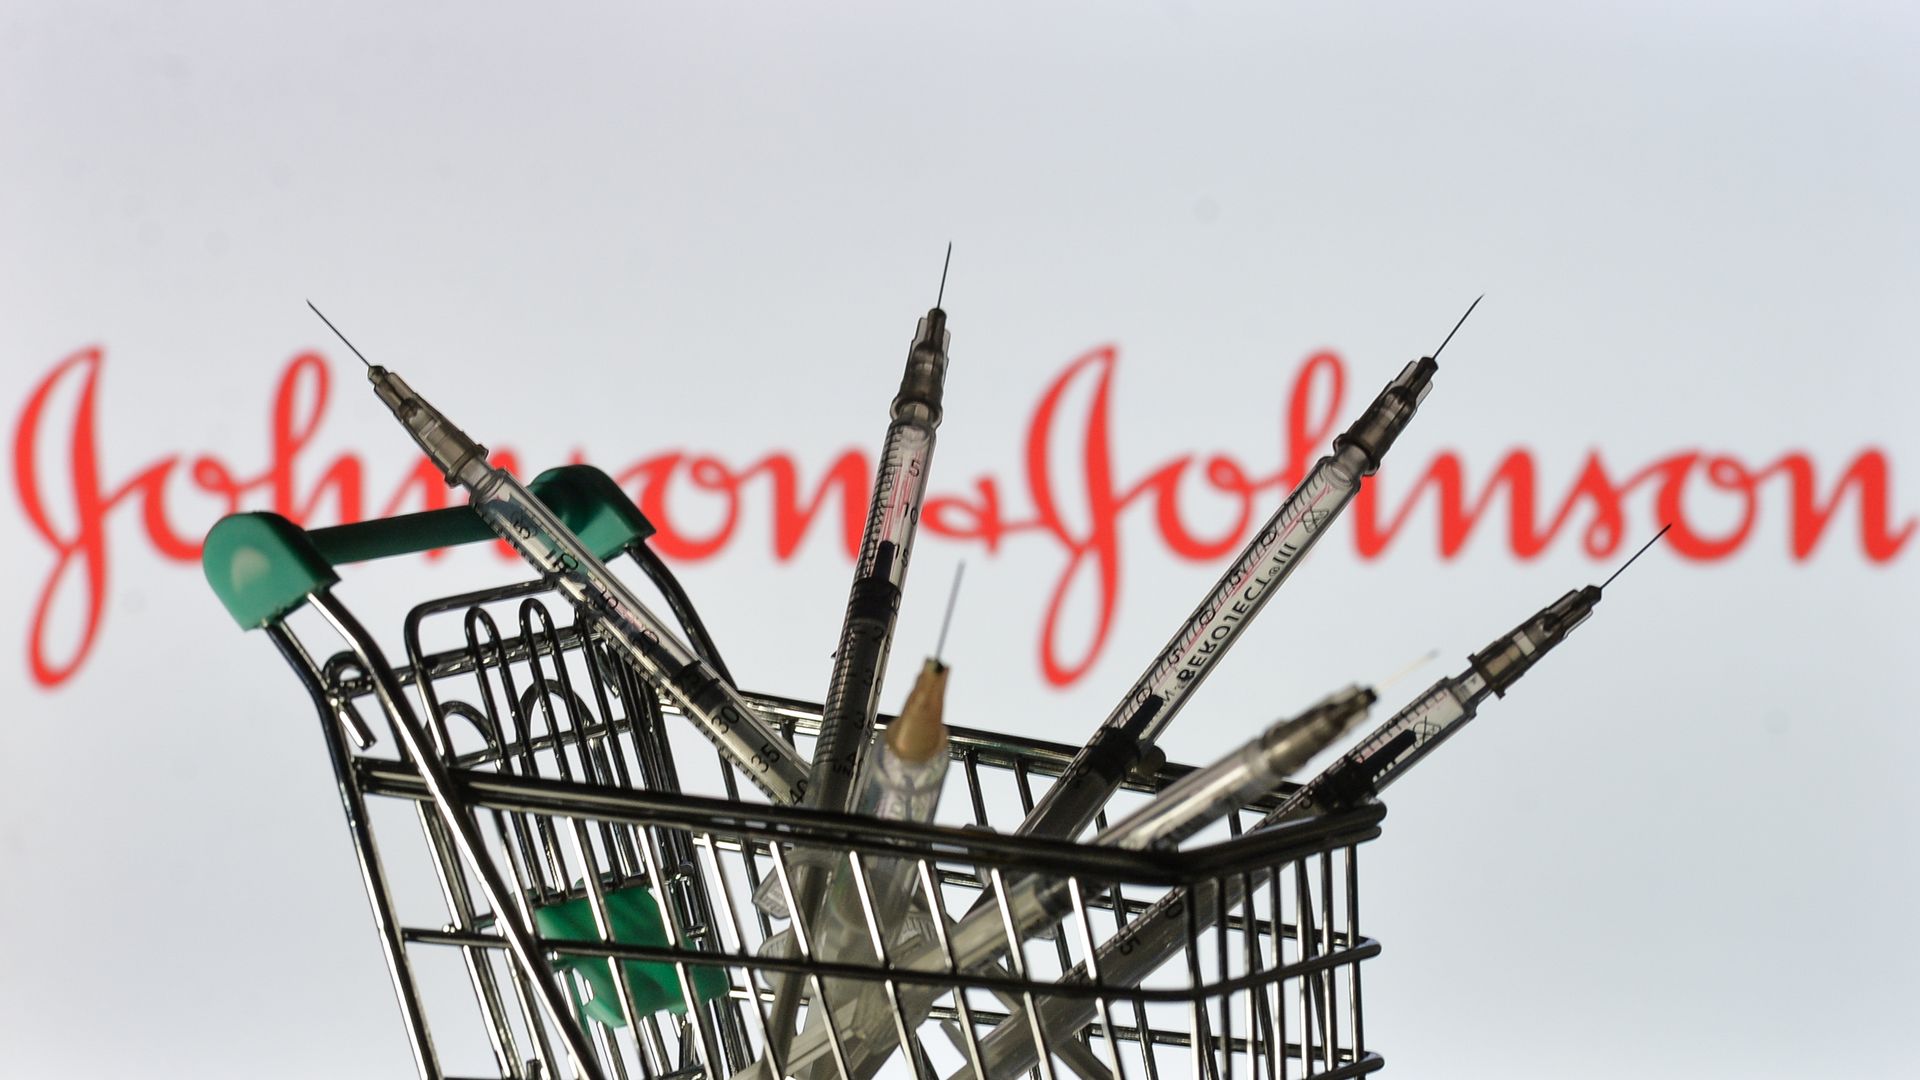 Image of syringes in front of the Johnson and Johnson logo.